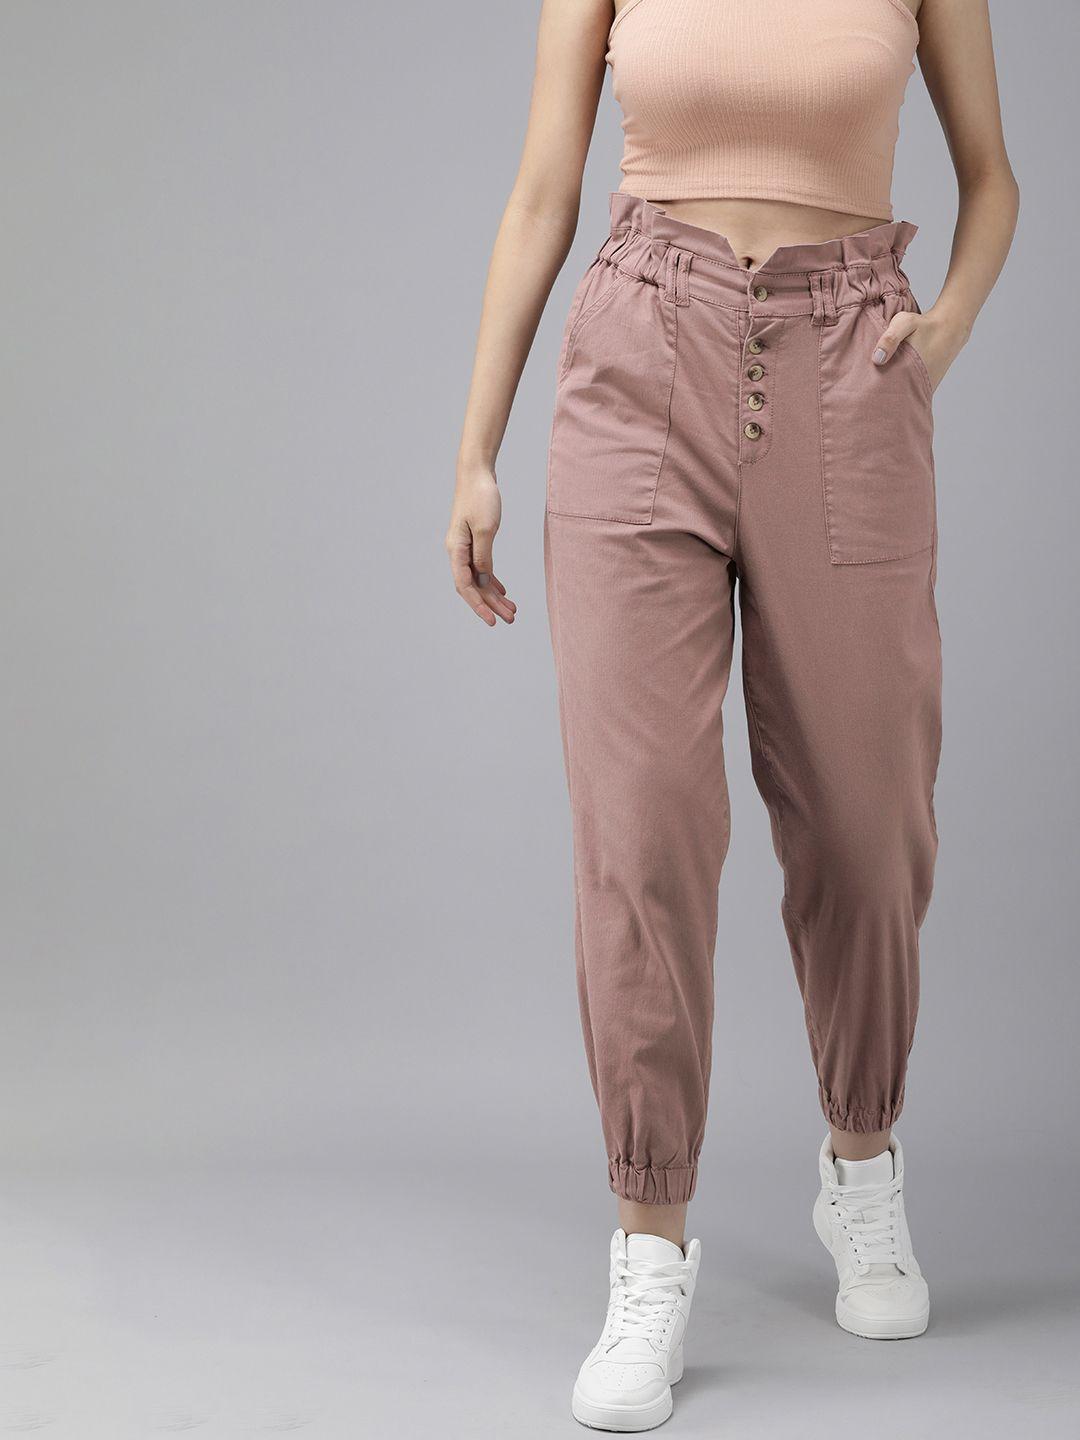 the-roadster-life-co.-women-mid-rise-joggers